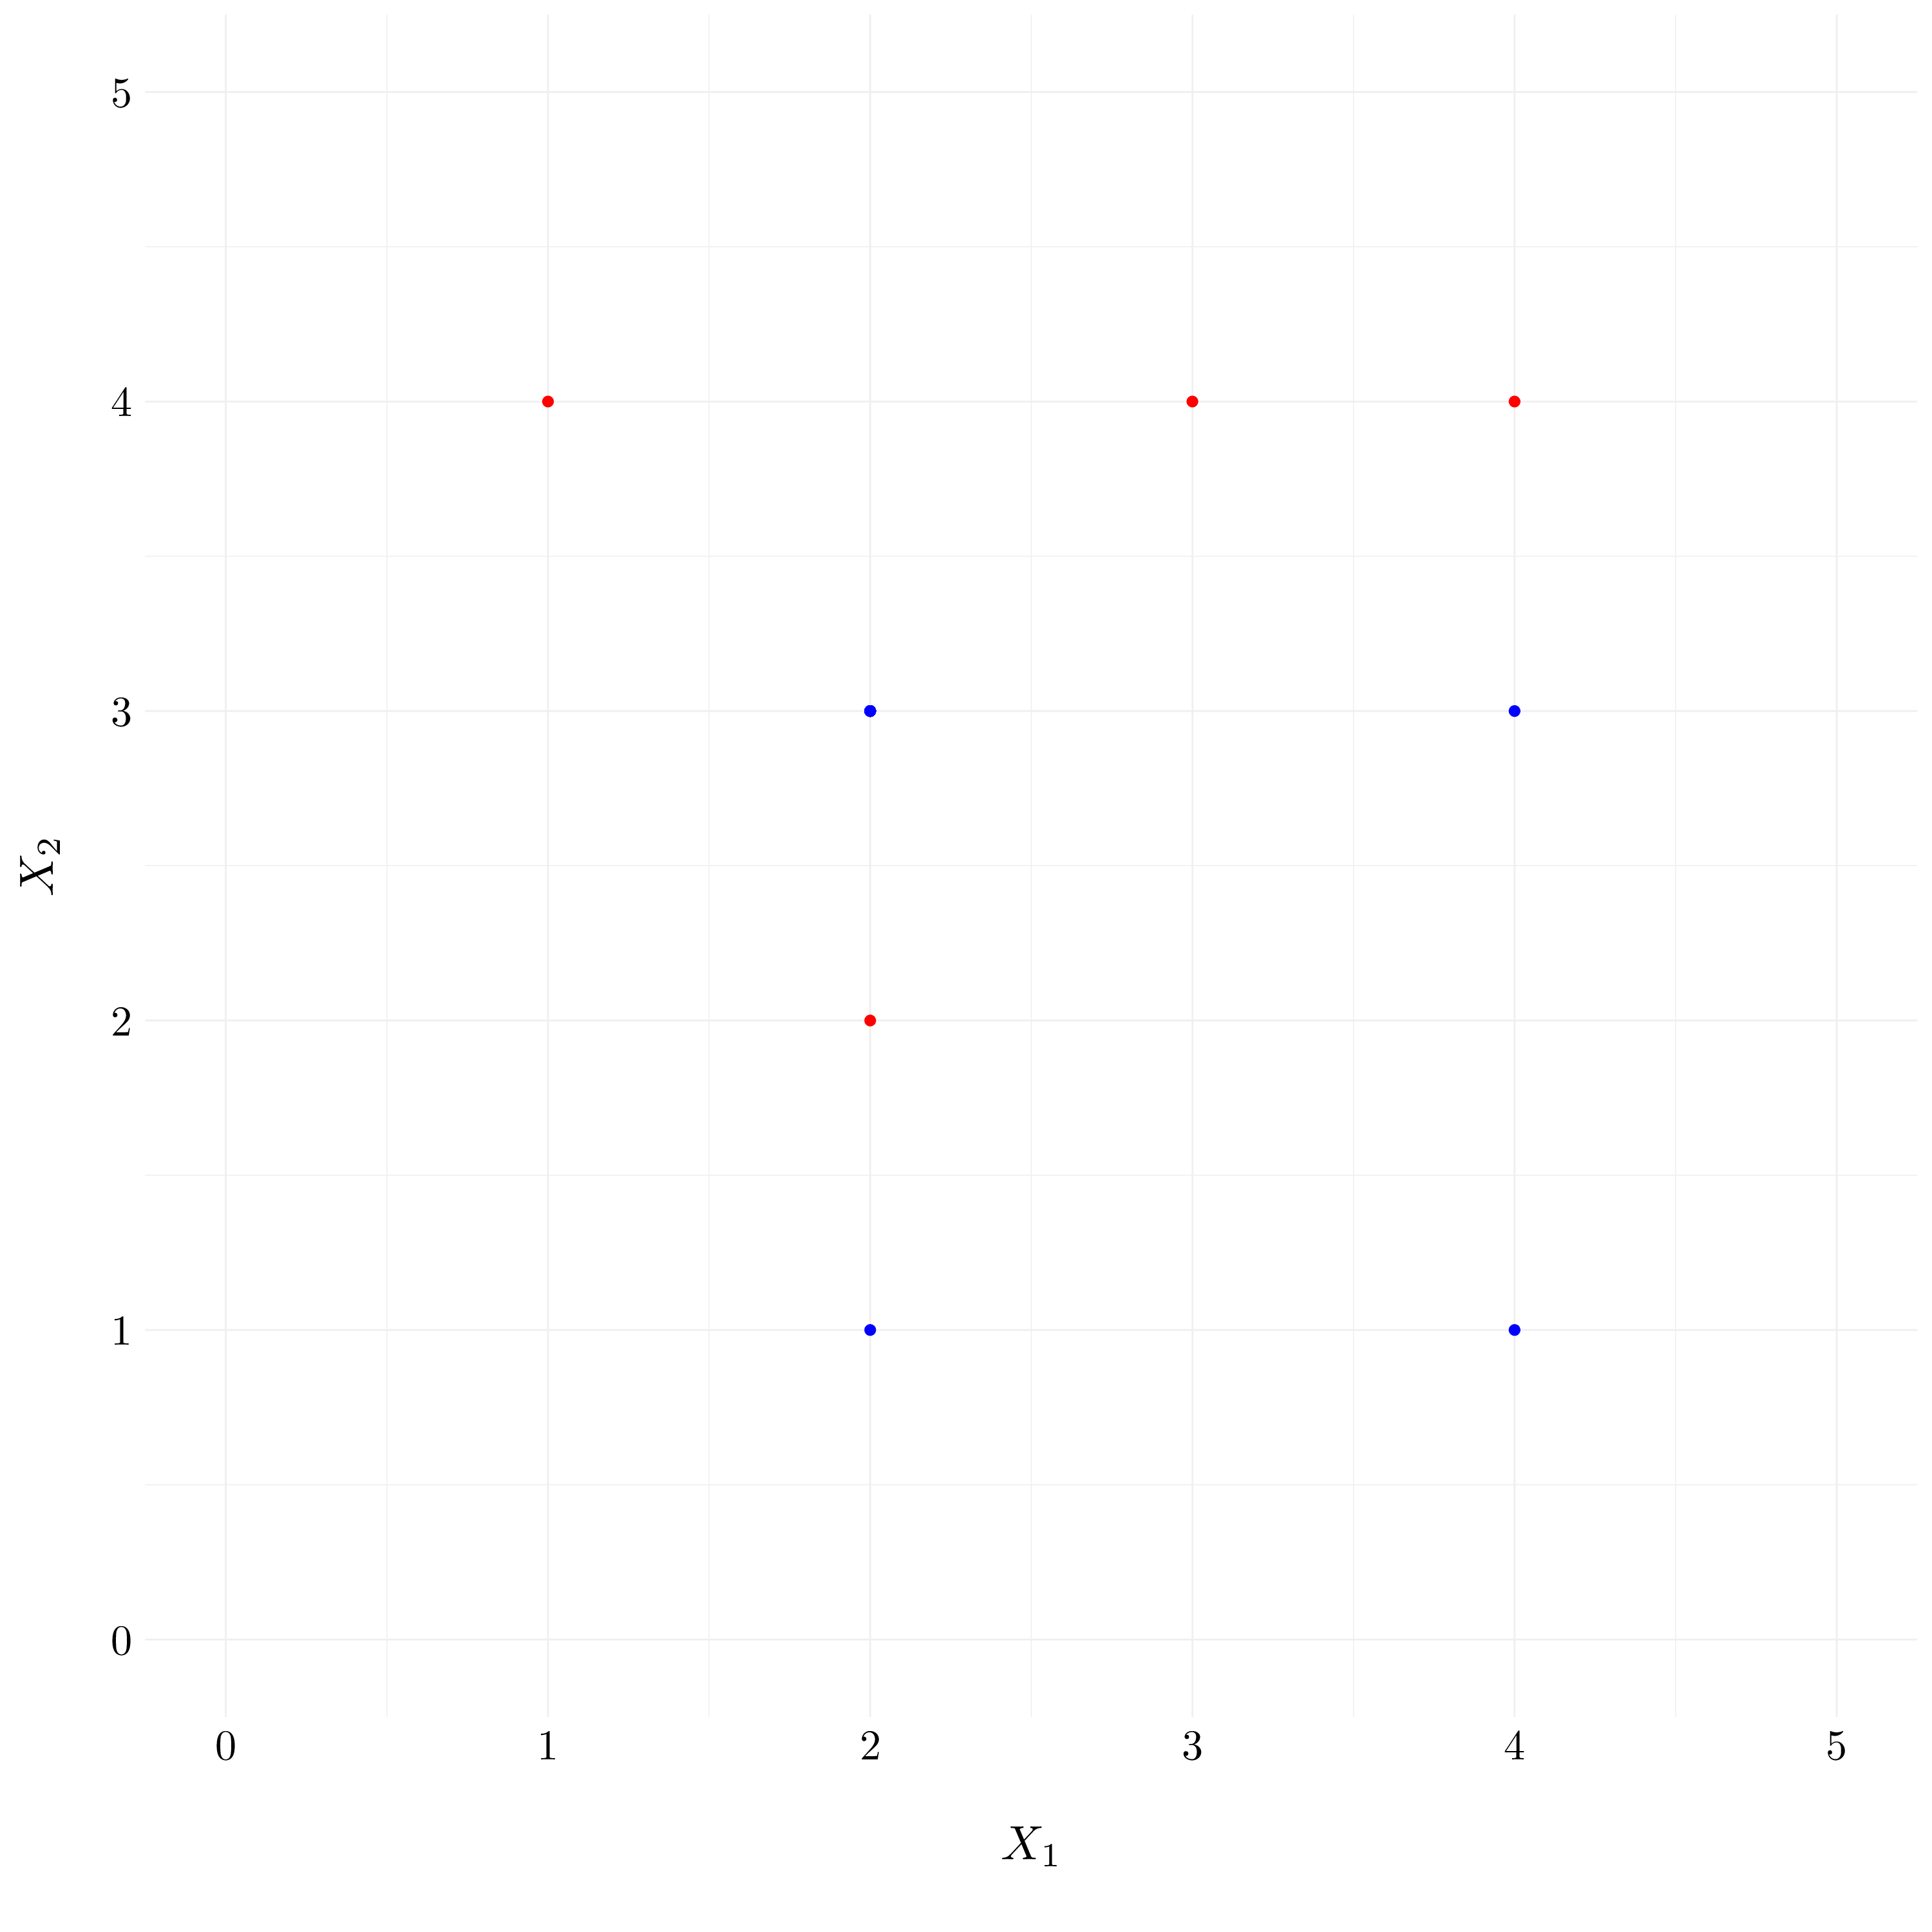 Example of the non-separable points